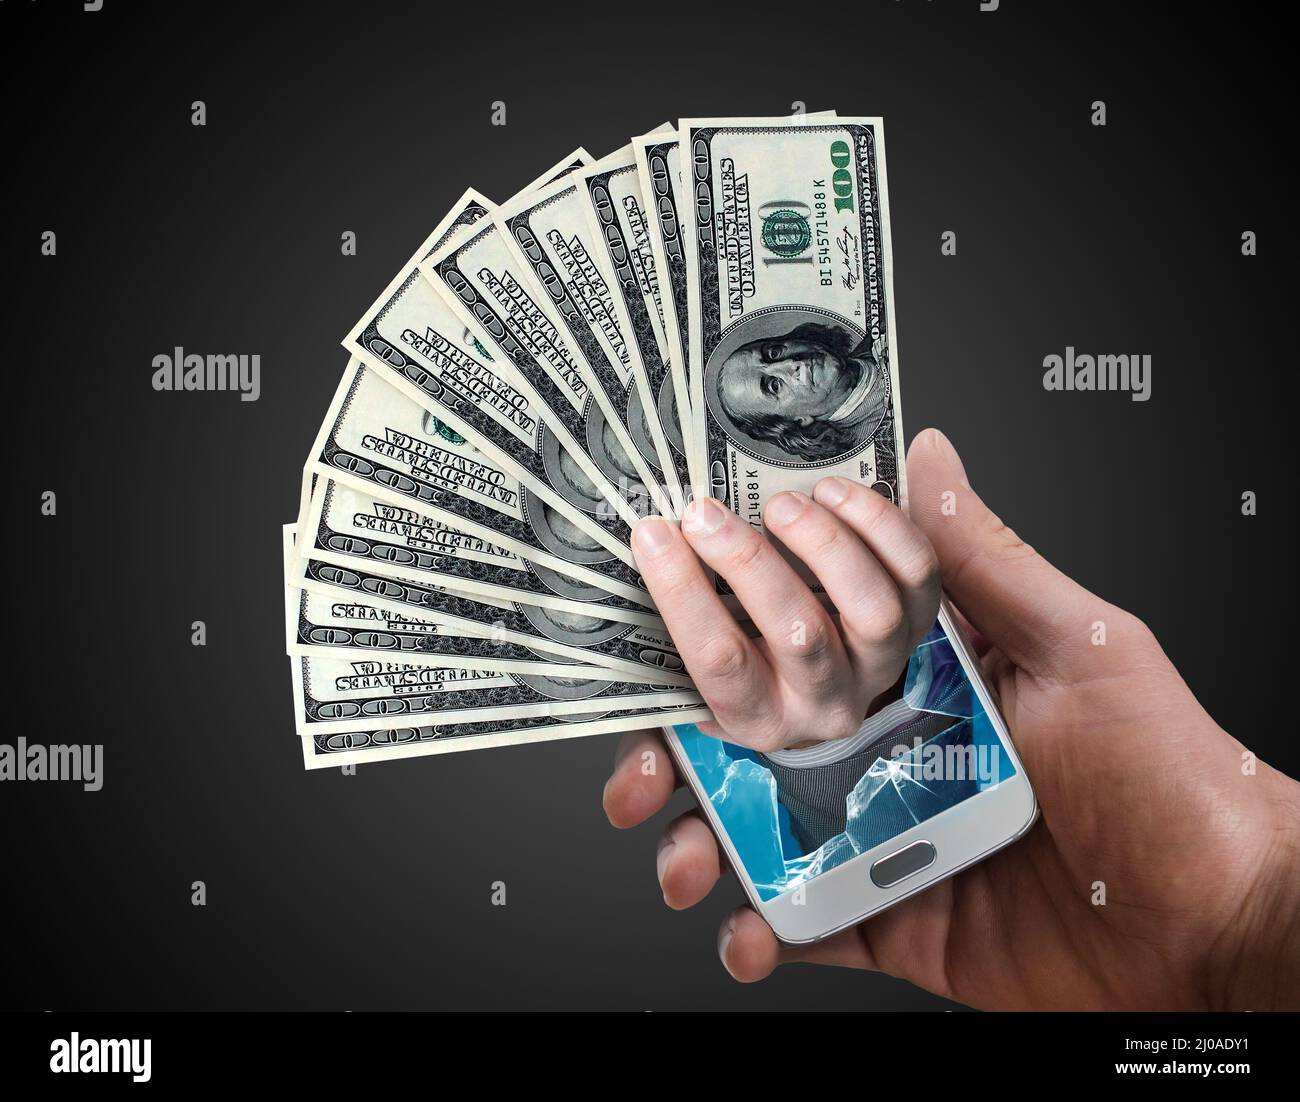 Hand holding dollar cash popping out from a phone screen. Online payment or reward concept. Stock Photo